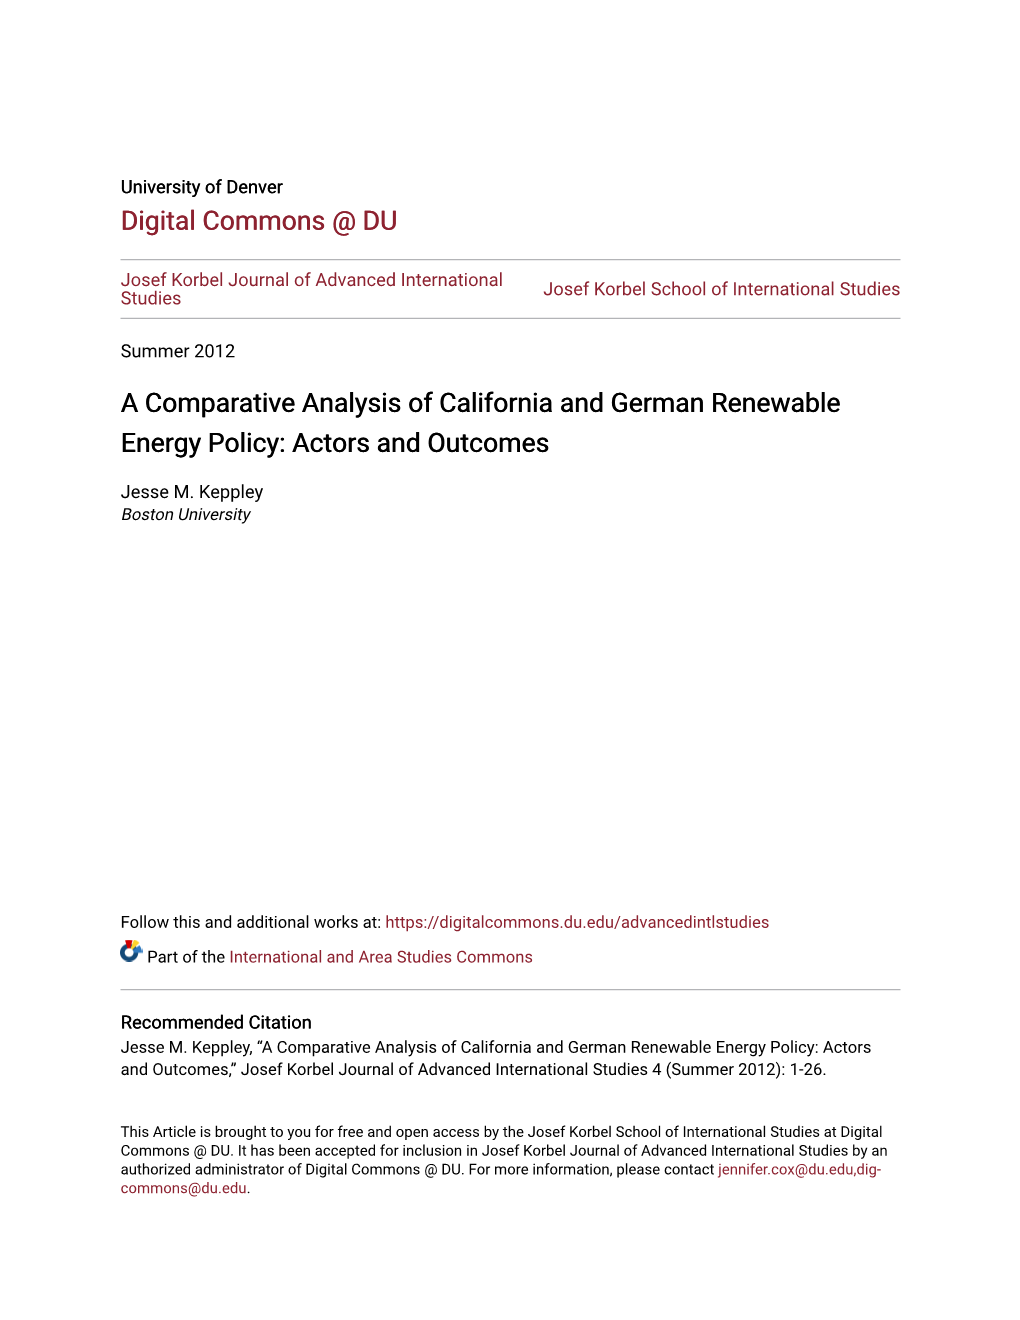 A Comparative Analysis of California and German Renewable Energy Policy: Actors and Outcomes